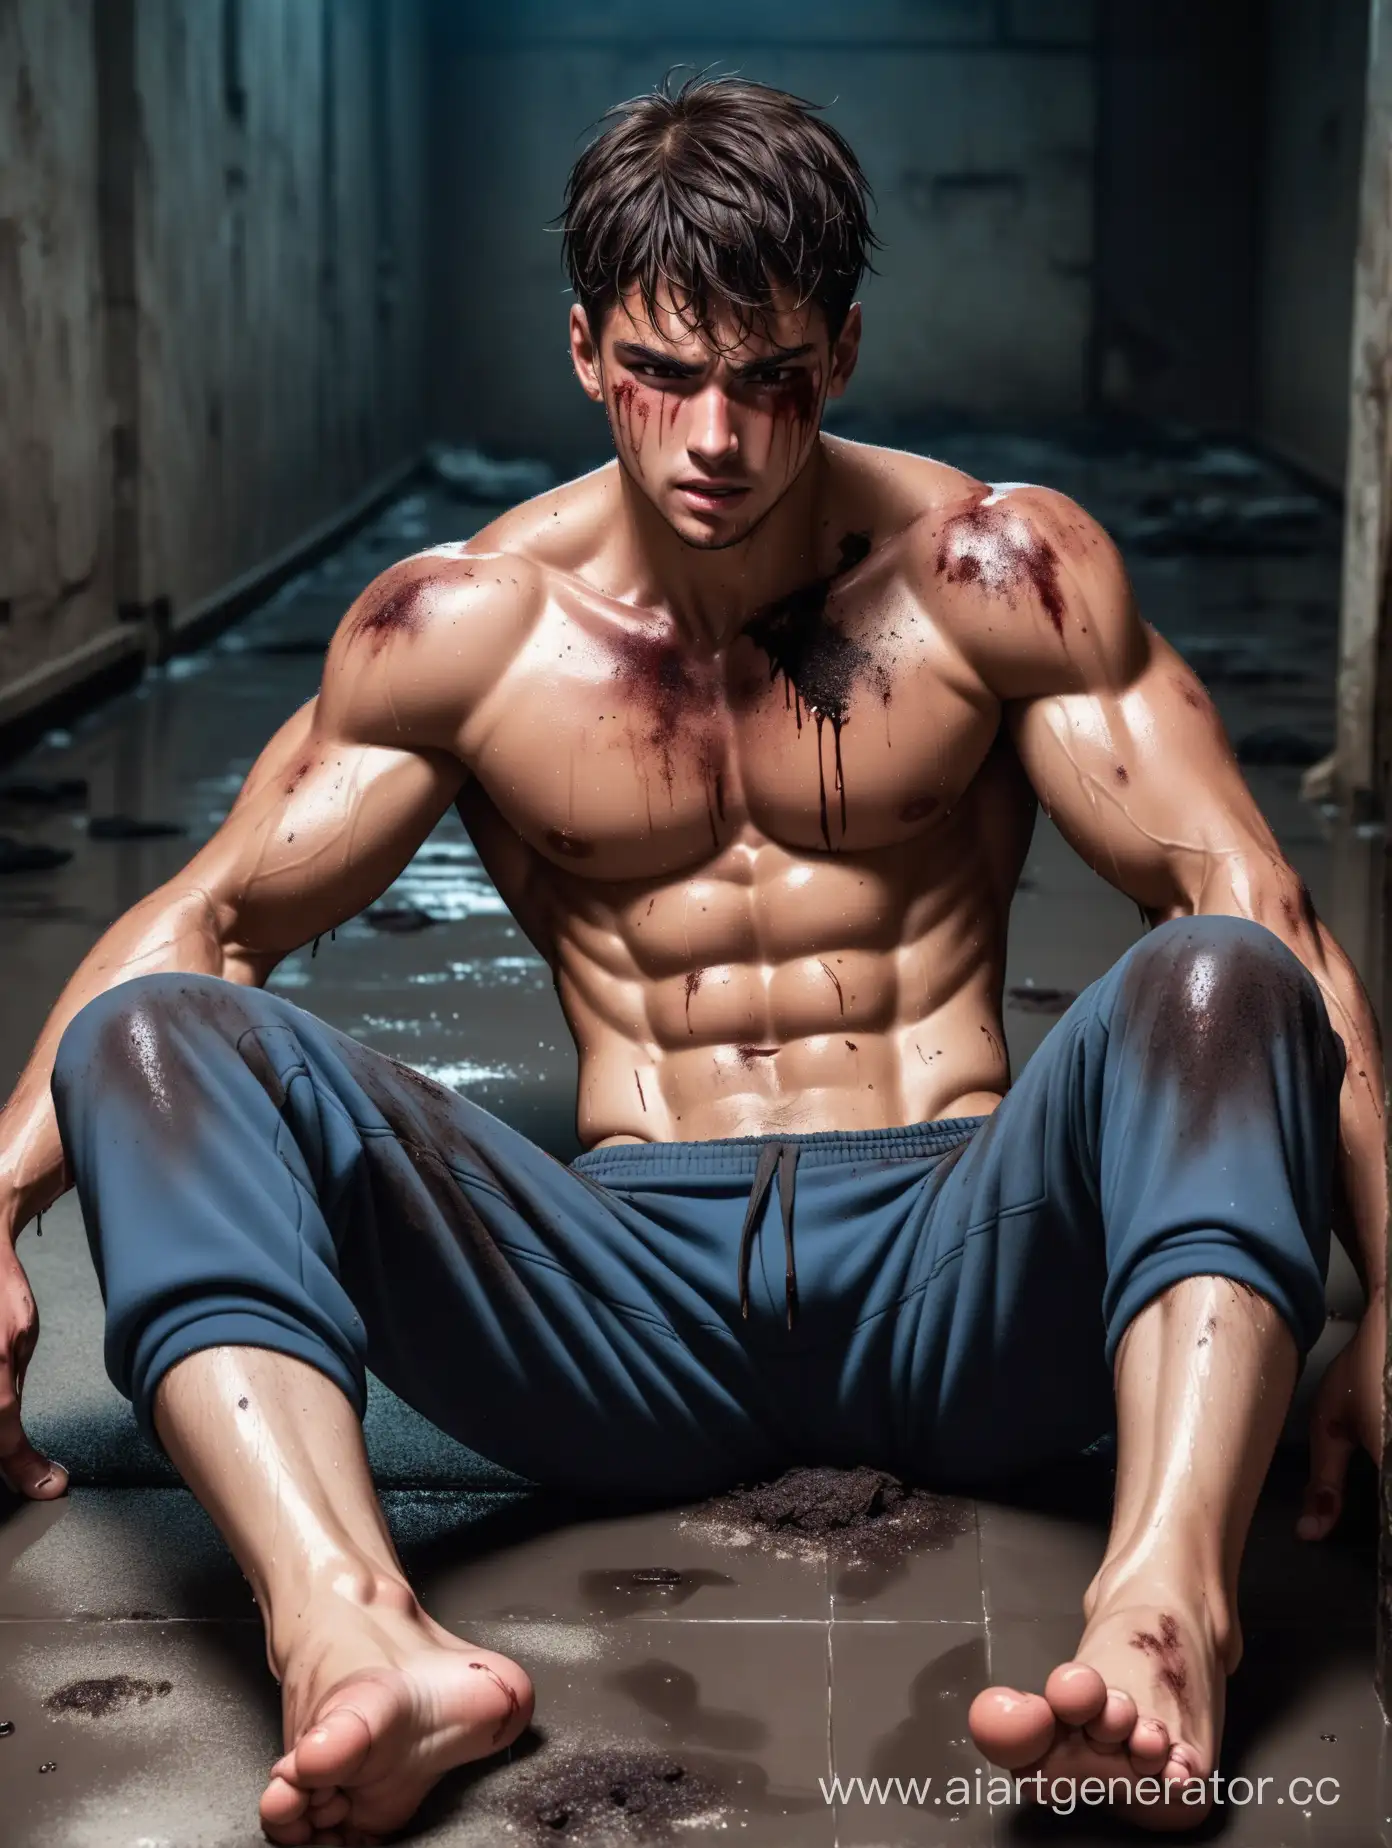 Hot muscular young guy. Libido boy suffers torture in an abandoned place. Lying on the dirty floor in agony. Brown eyes, sweaty naked abs. Dirty, worn indigo sweatpants. Gunshot wounds on thighs, bare feet